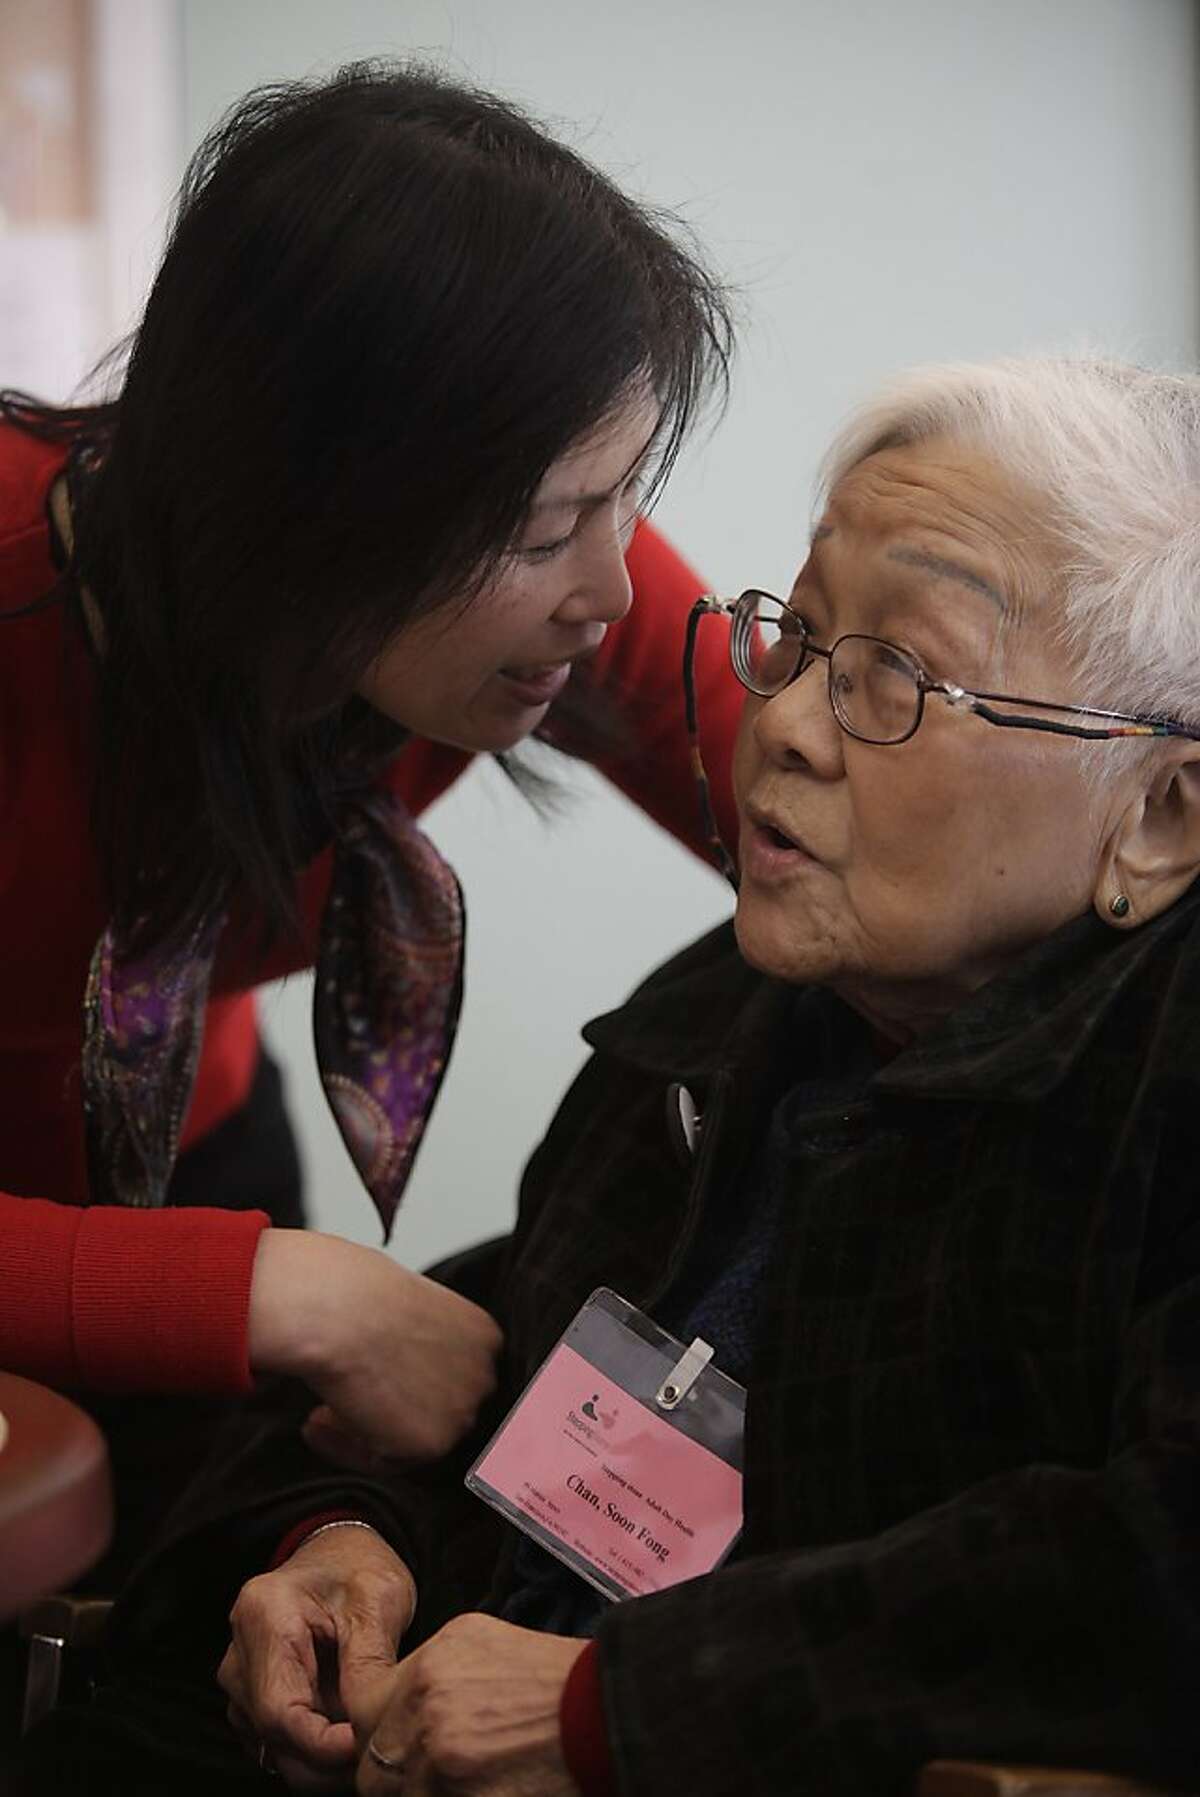 Mei Chen (l to r), activity coordinator, talks with Chan Soon Fong, 92, in the Day Room at the SteppingStone Mabini Day Health on Tuesday, February 14, 2012 in San Francisco, Calif.